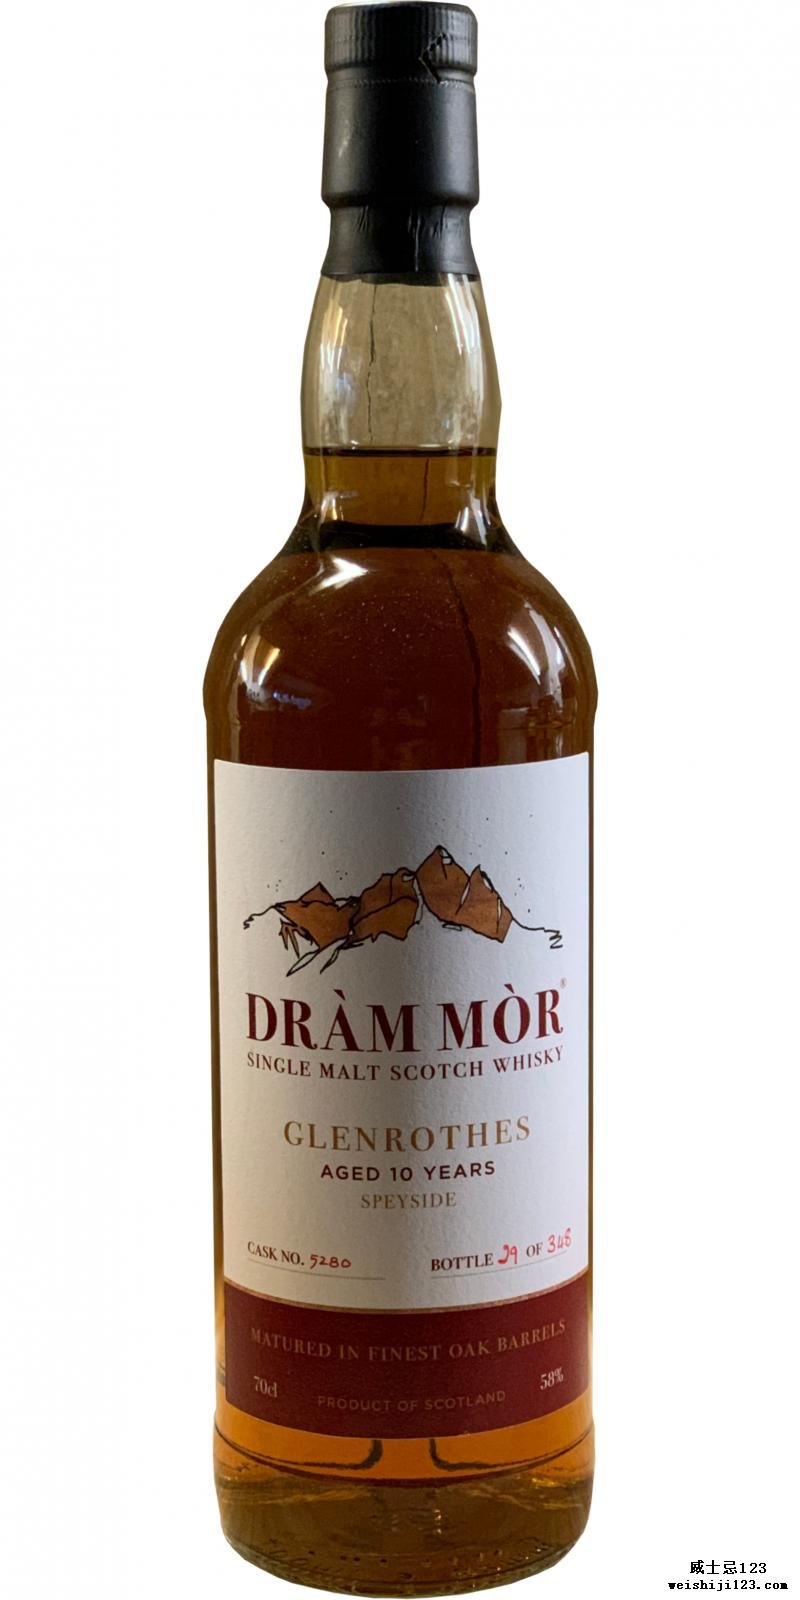 Glenrothes 10-year-old DMor